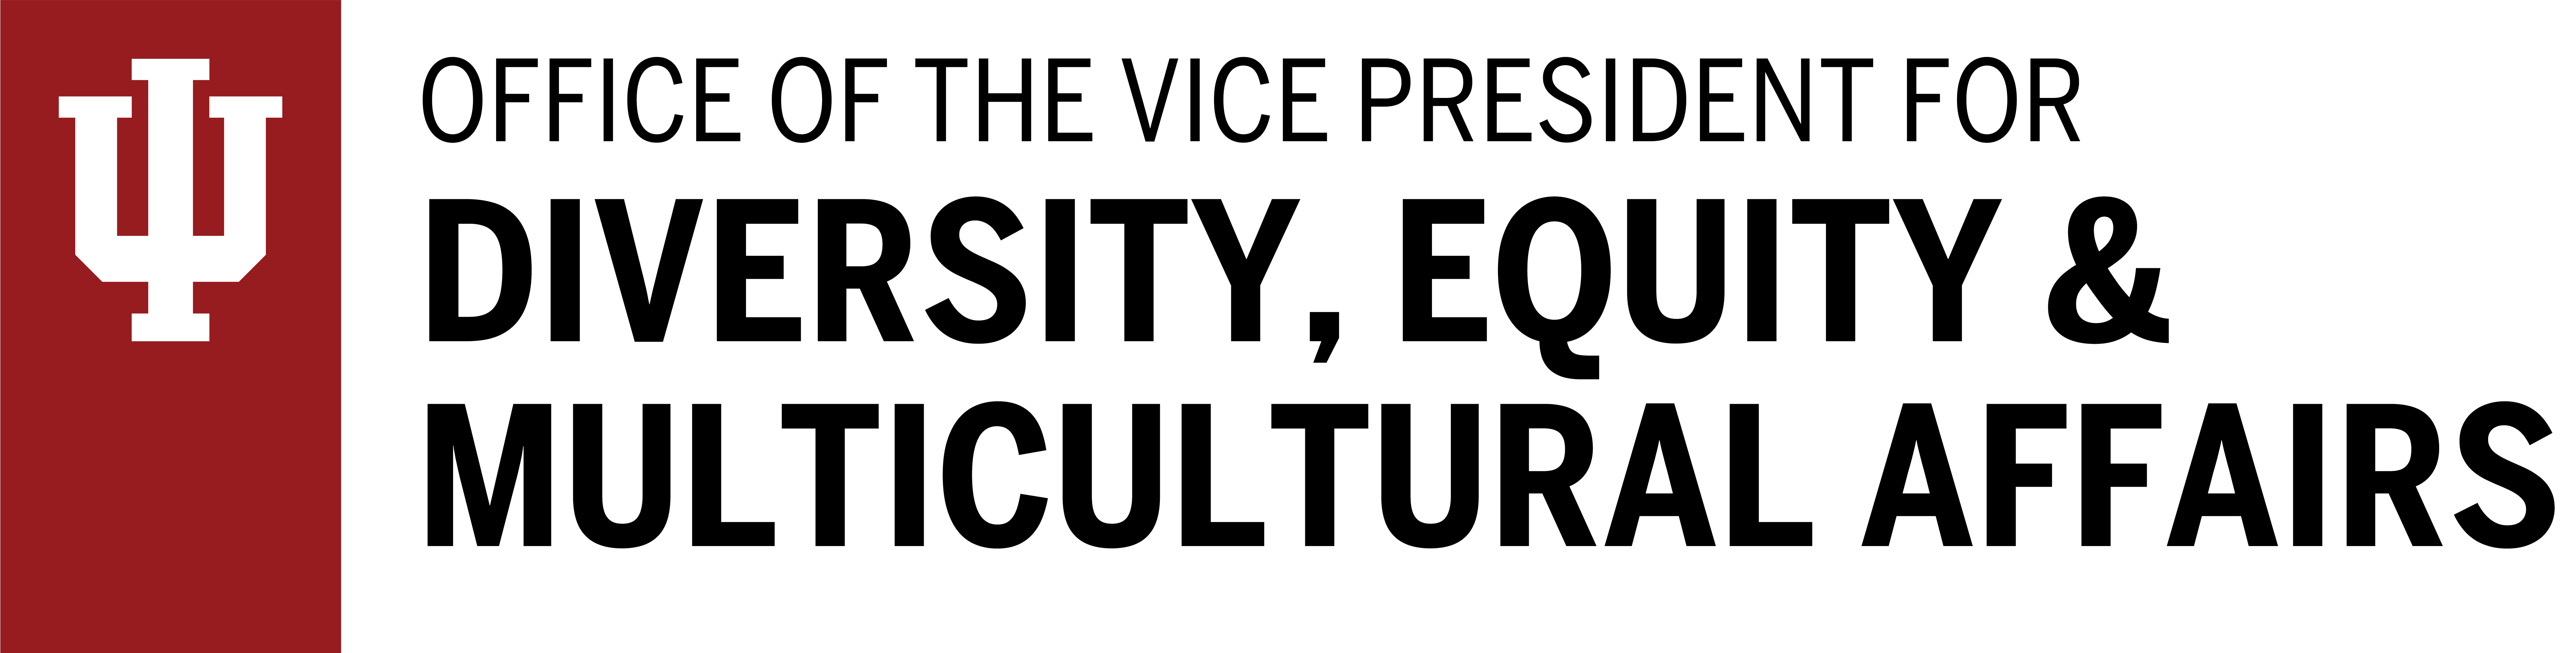 Office of the Vice President for Diversity, Equity and Multicultural Affairs